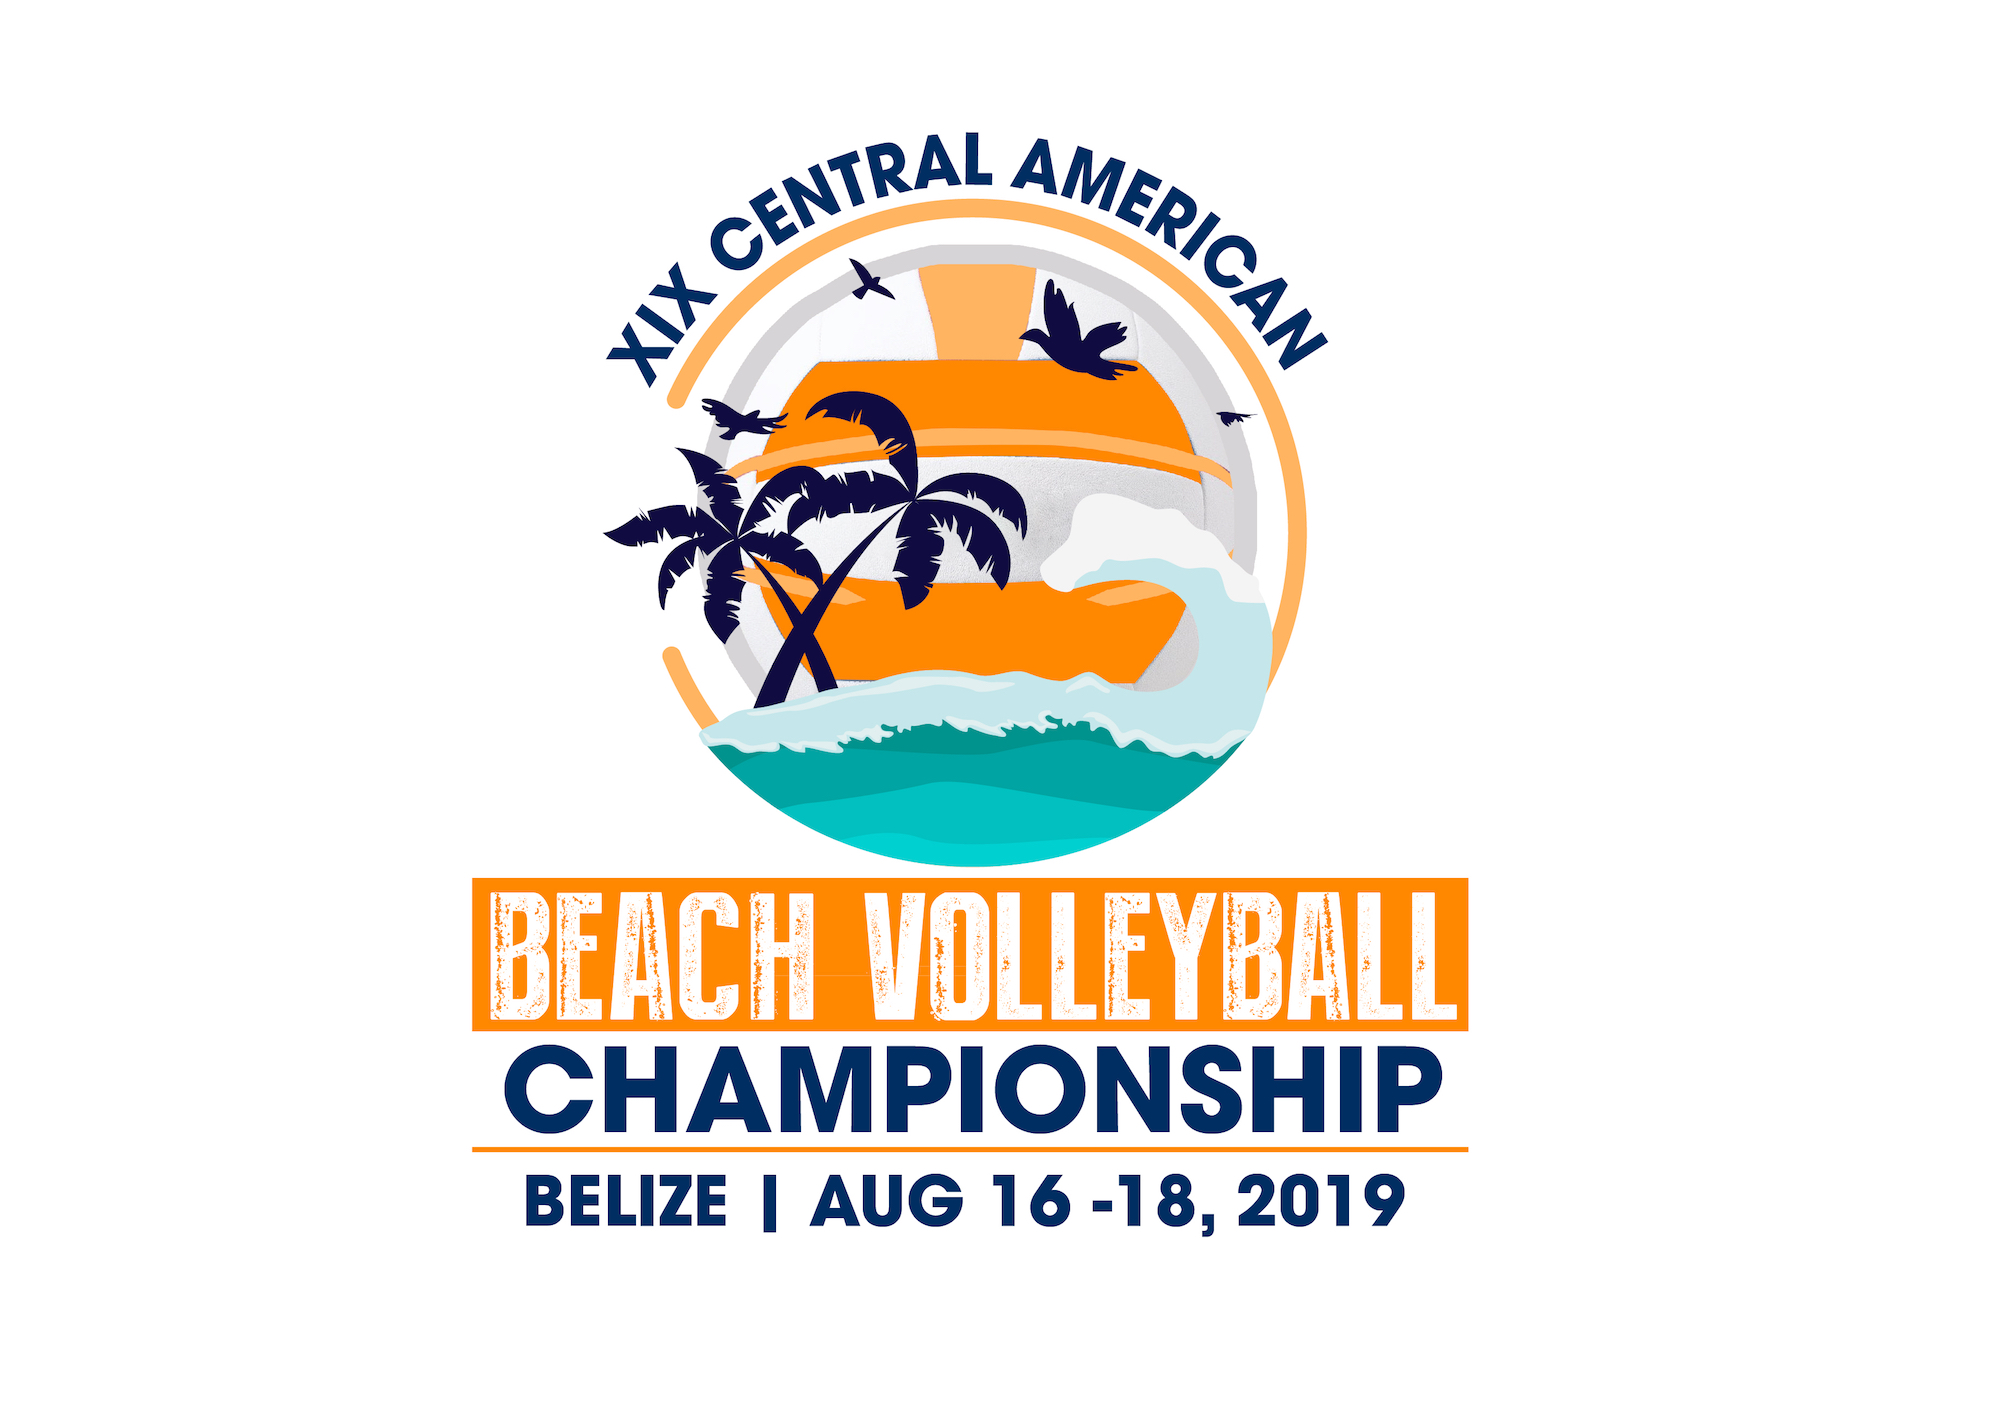 Belize to Host the XIX Central American Beach Volleyball Championship ...